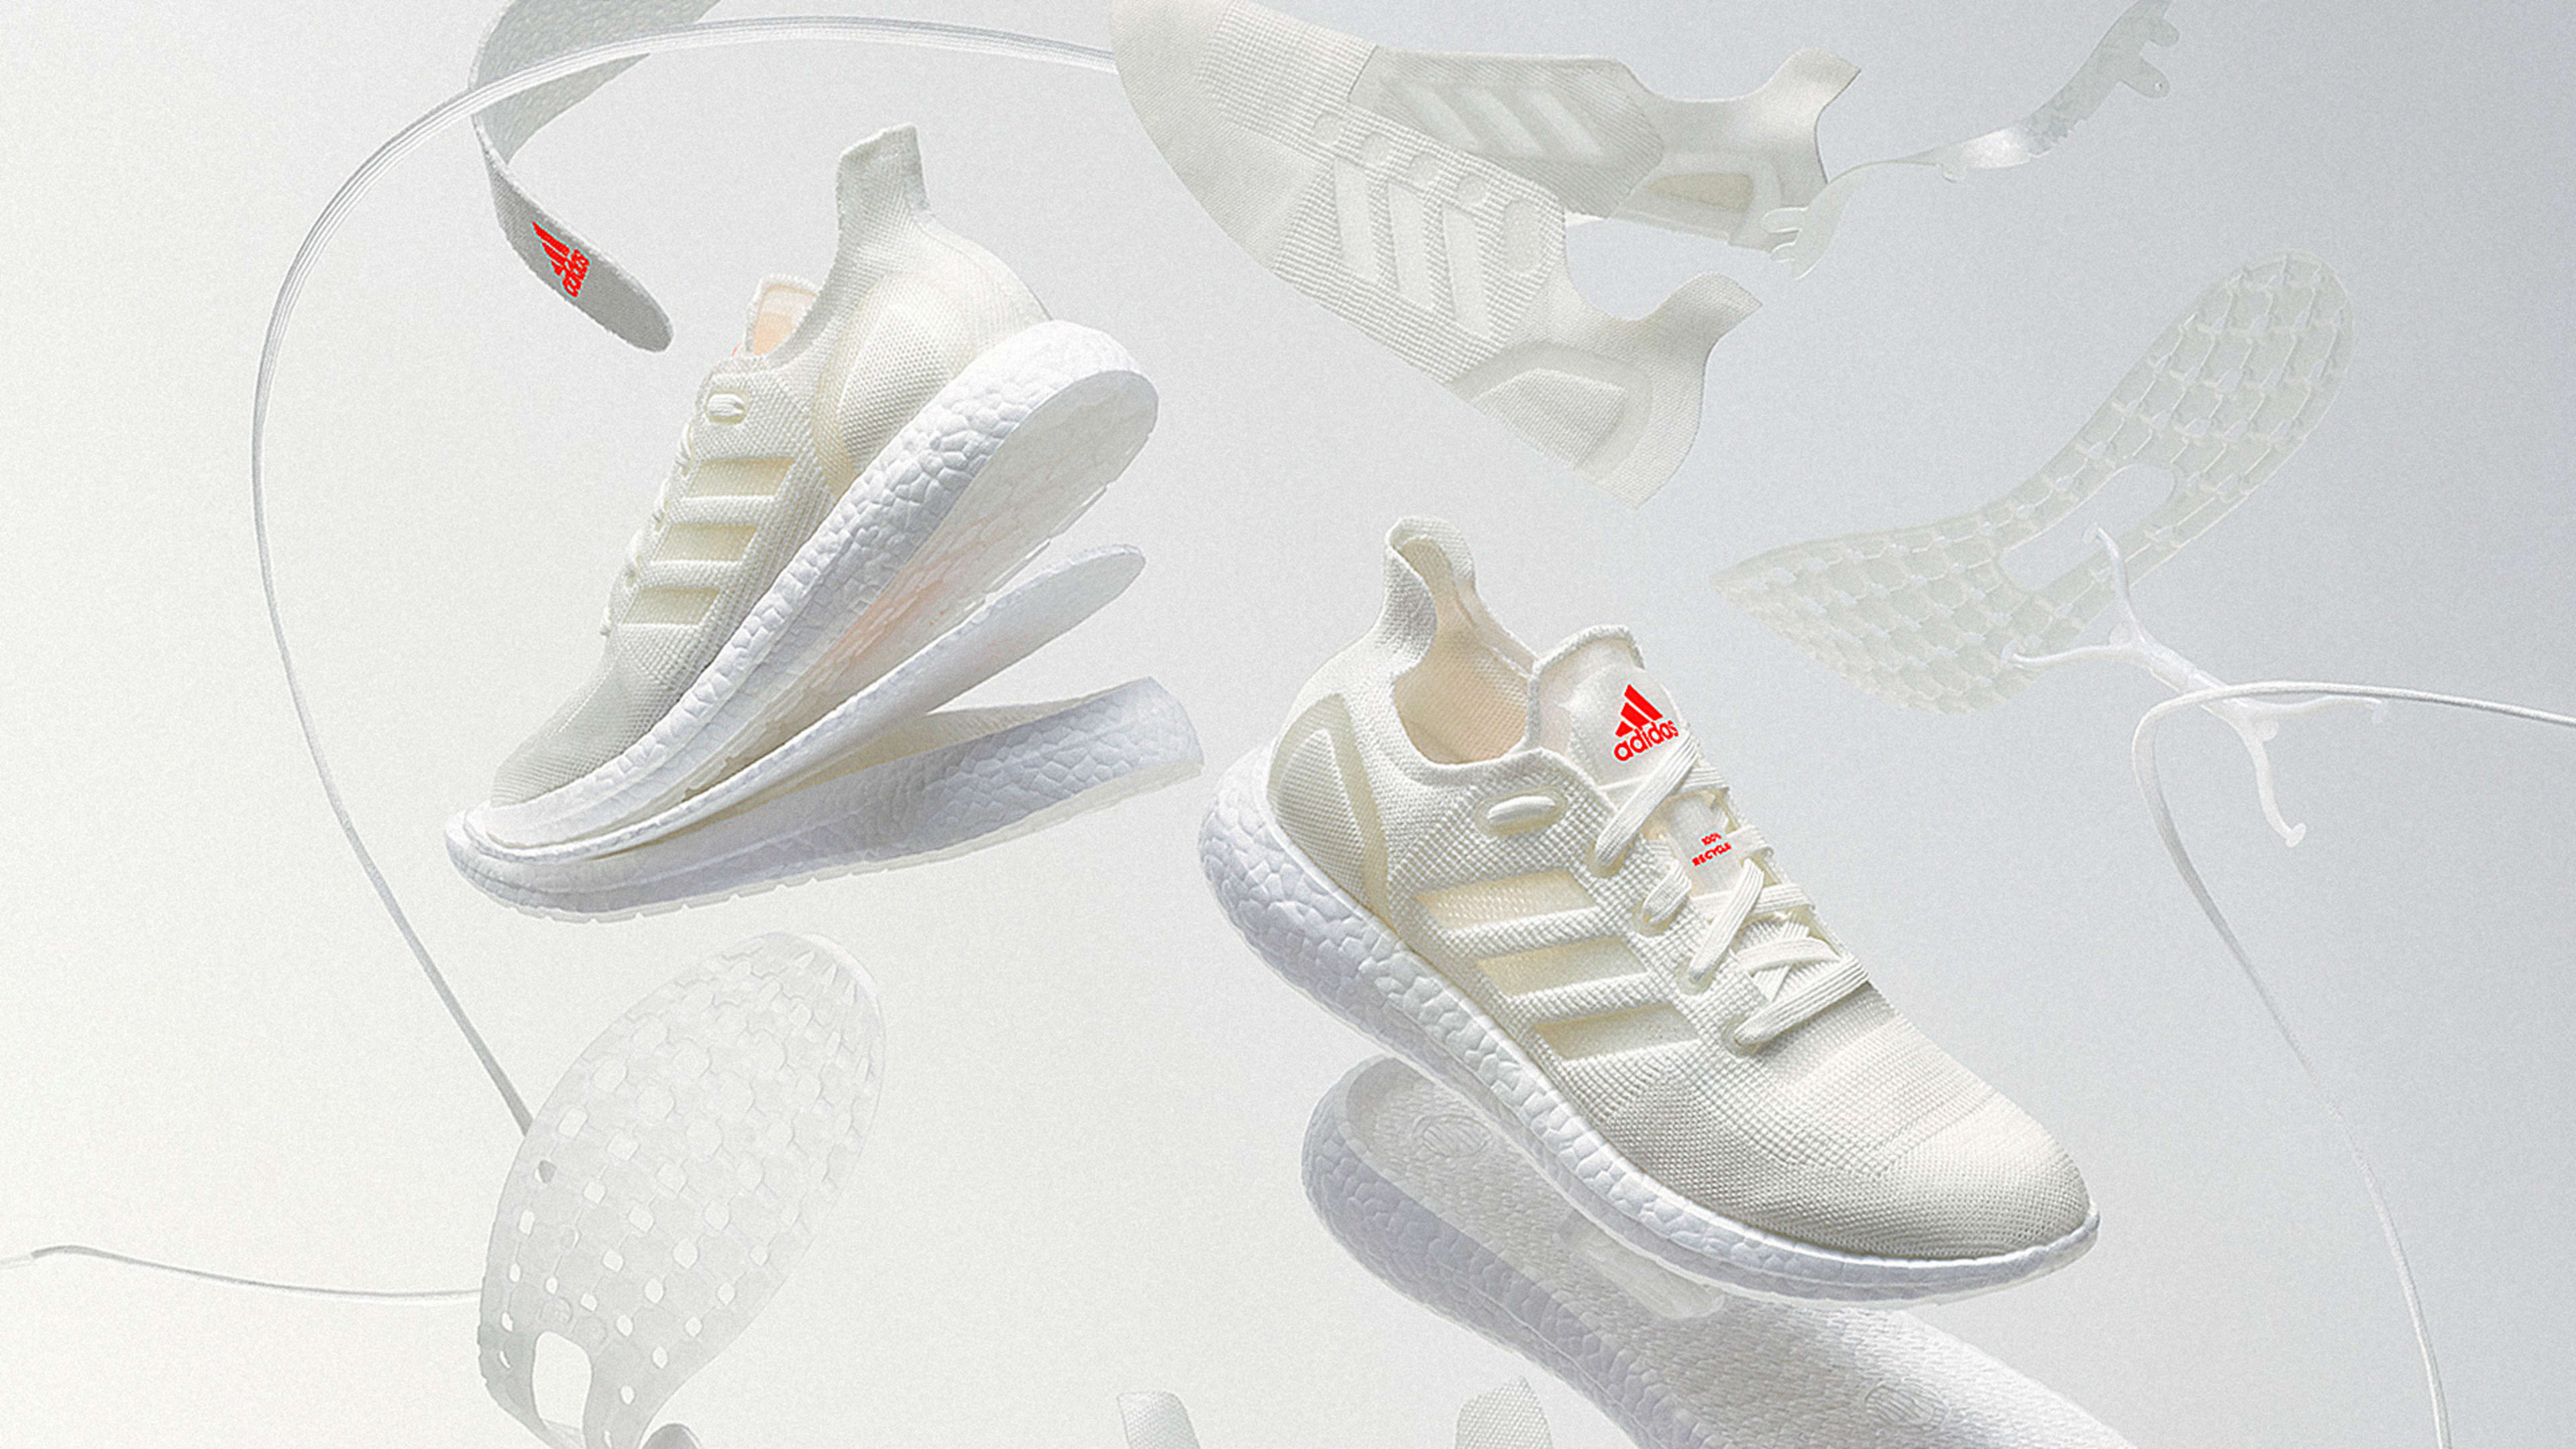 Exclusive: Adidas’s radical new shoe could change how the world buys sneakers